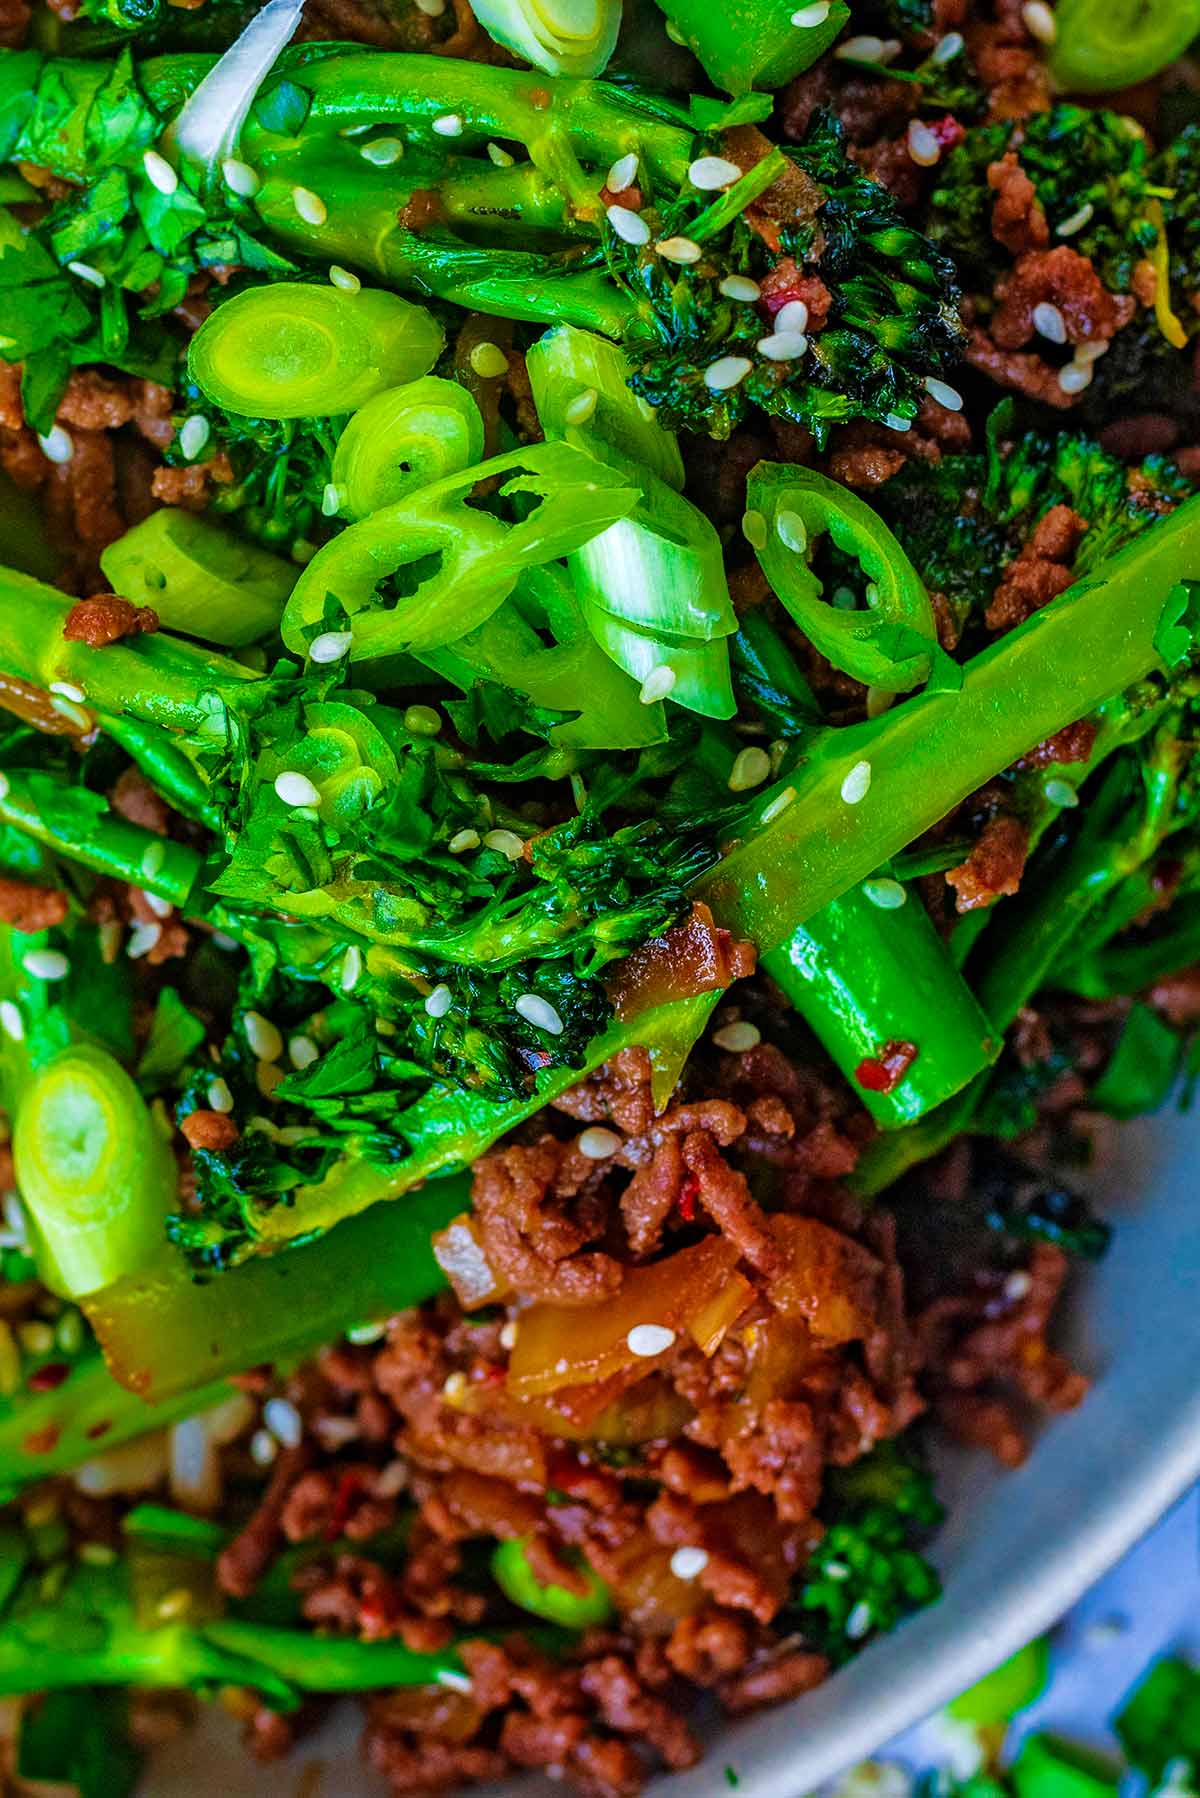 Cooked ground beef in a sticky sauce with broccoli and chopped spring onions.